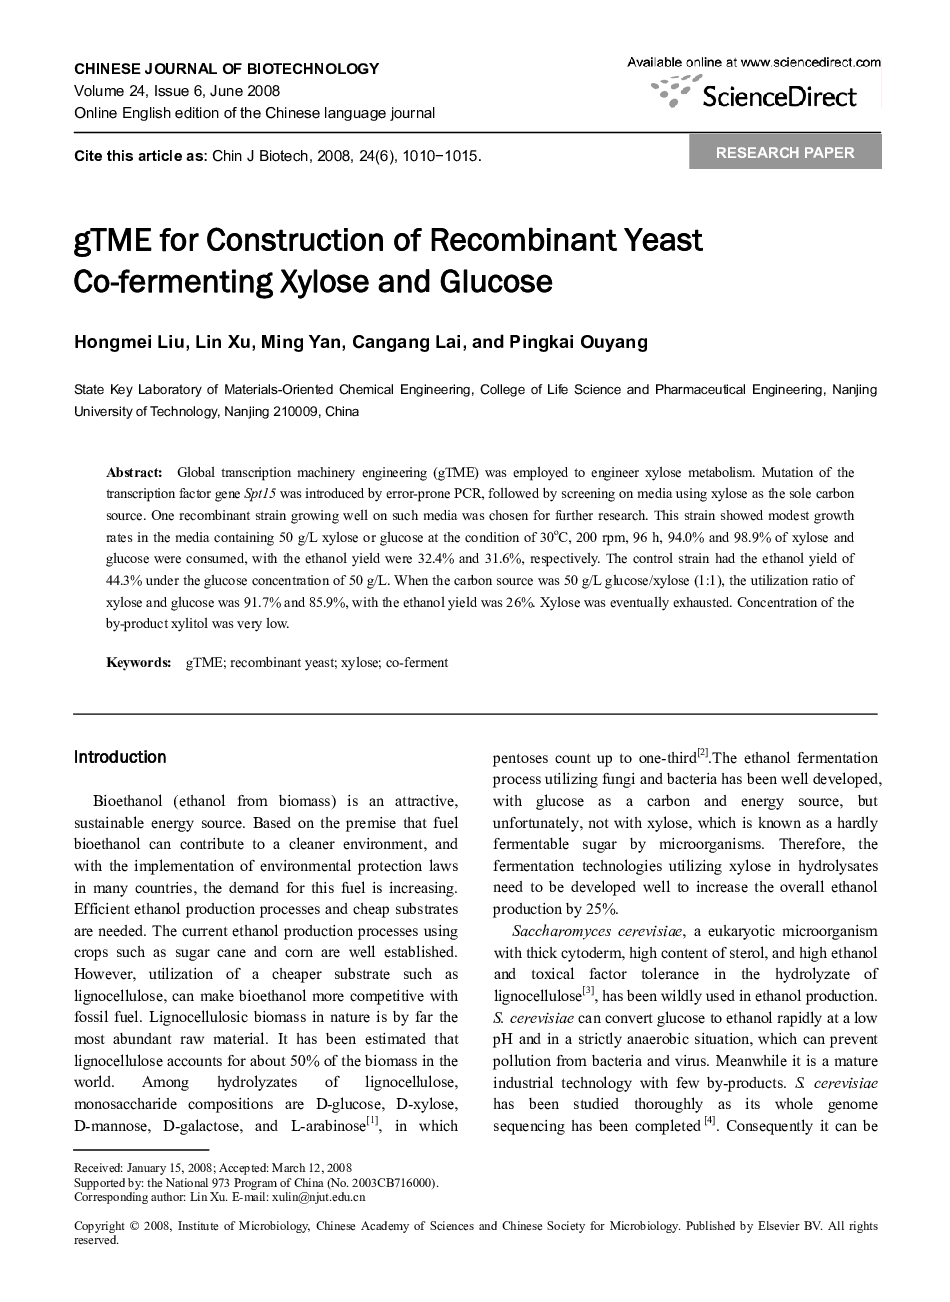 gTME for Construction of Recombinant Yeast Co-fermenting Xylose and Glucose